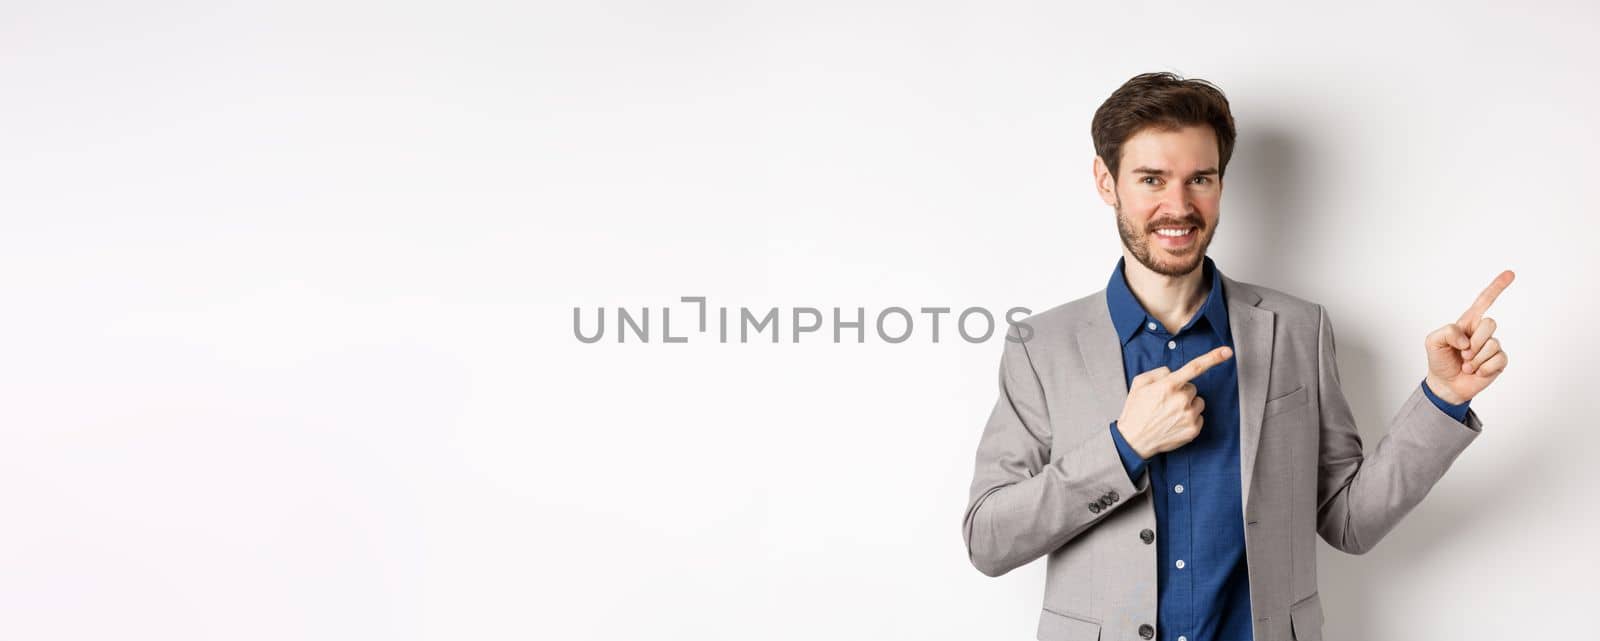 Handsome smiling man in business suit pointing fingers at upper right corner, showing logo, advertising company, standing on white background.